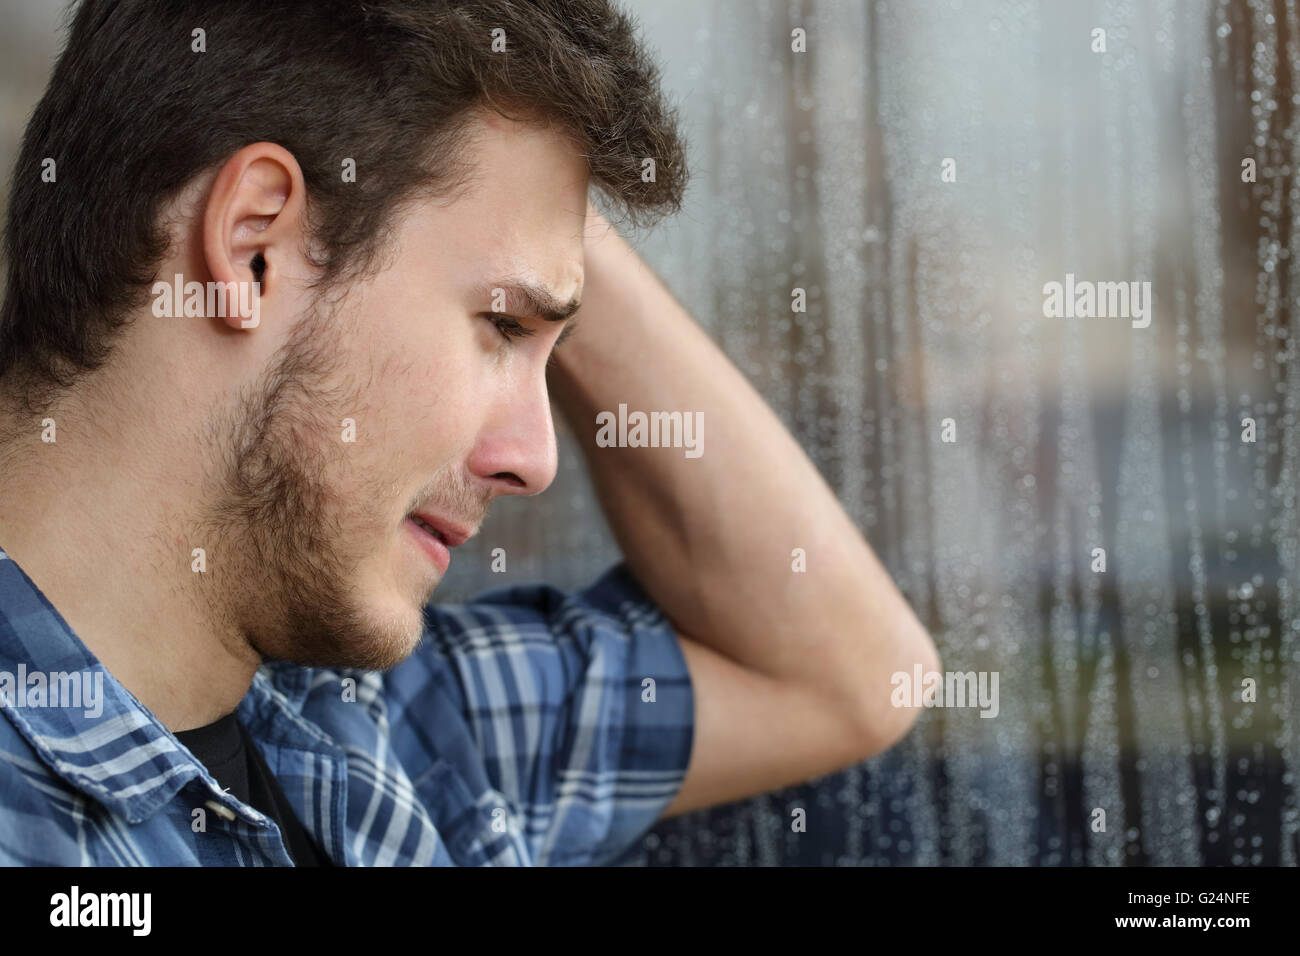 Side view of a sad man looking through window almost crying in a rainy day Stock Photo